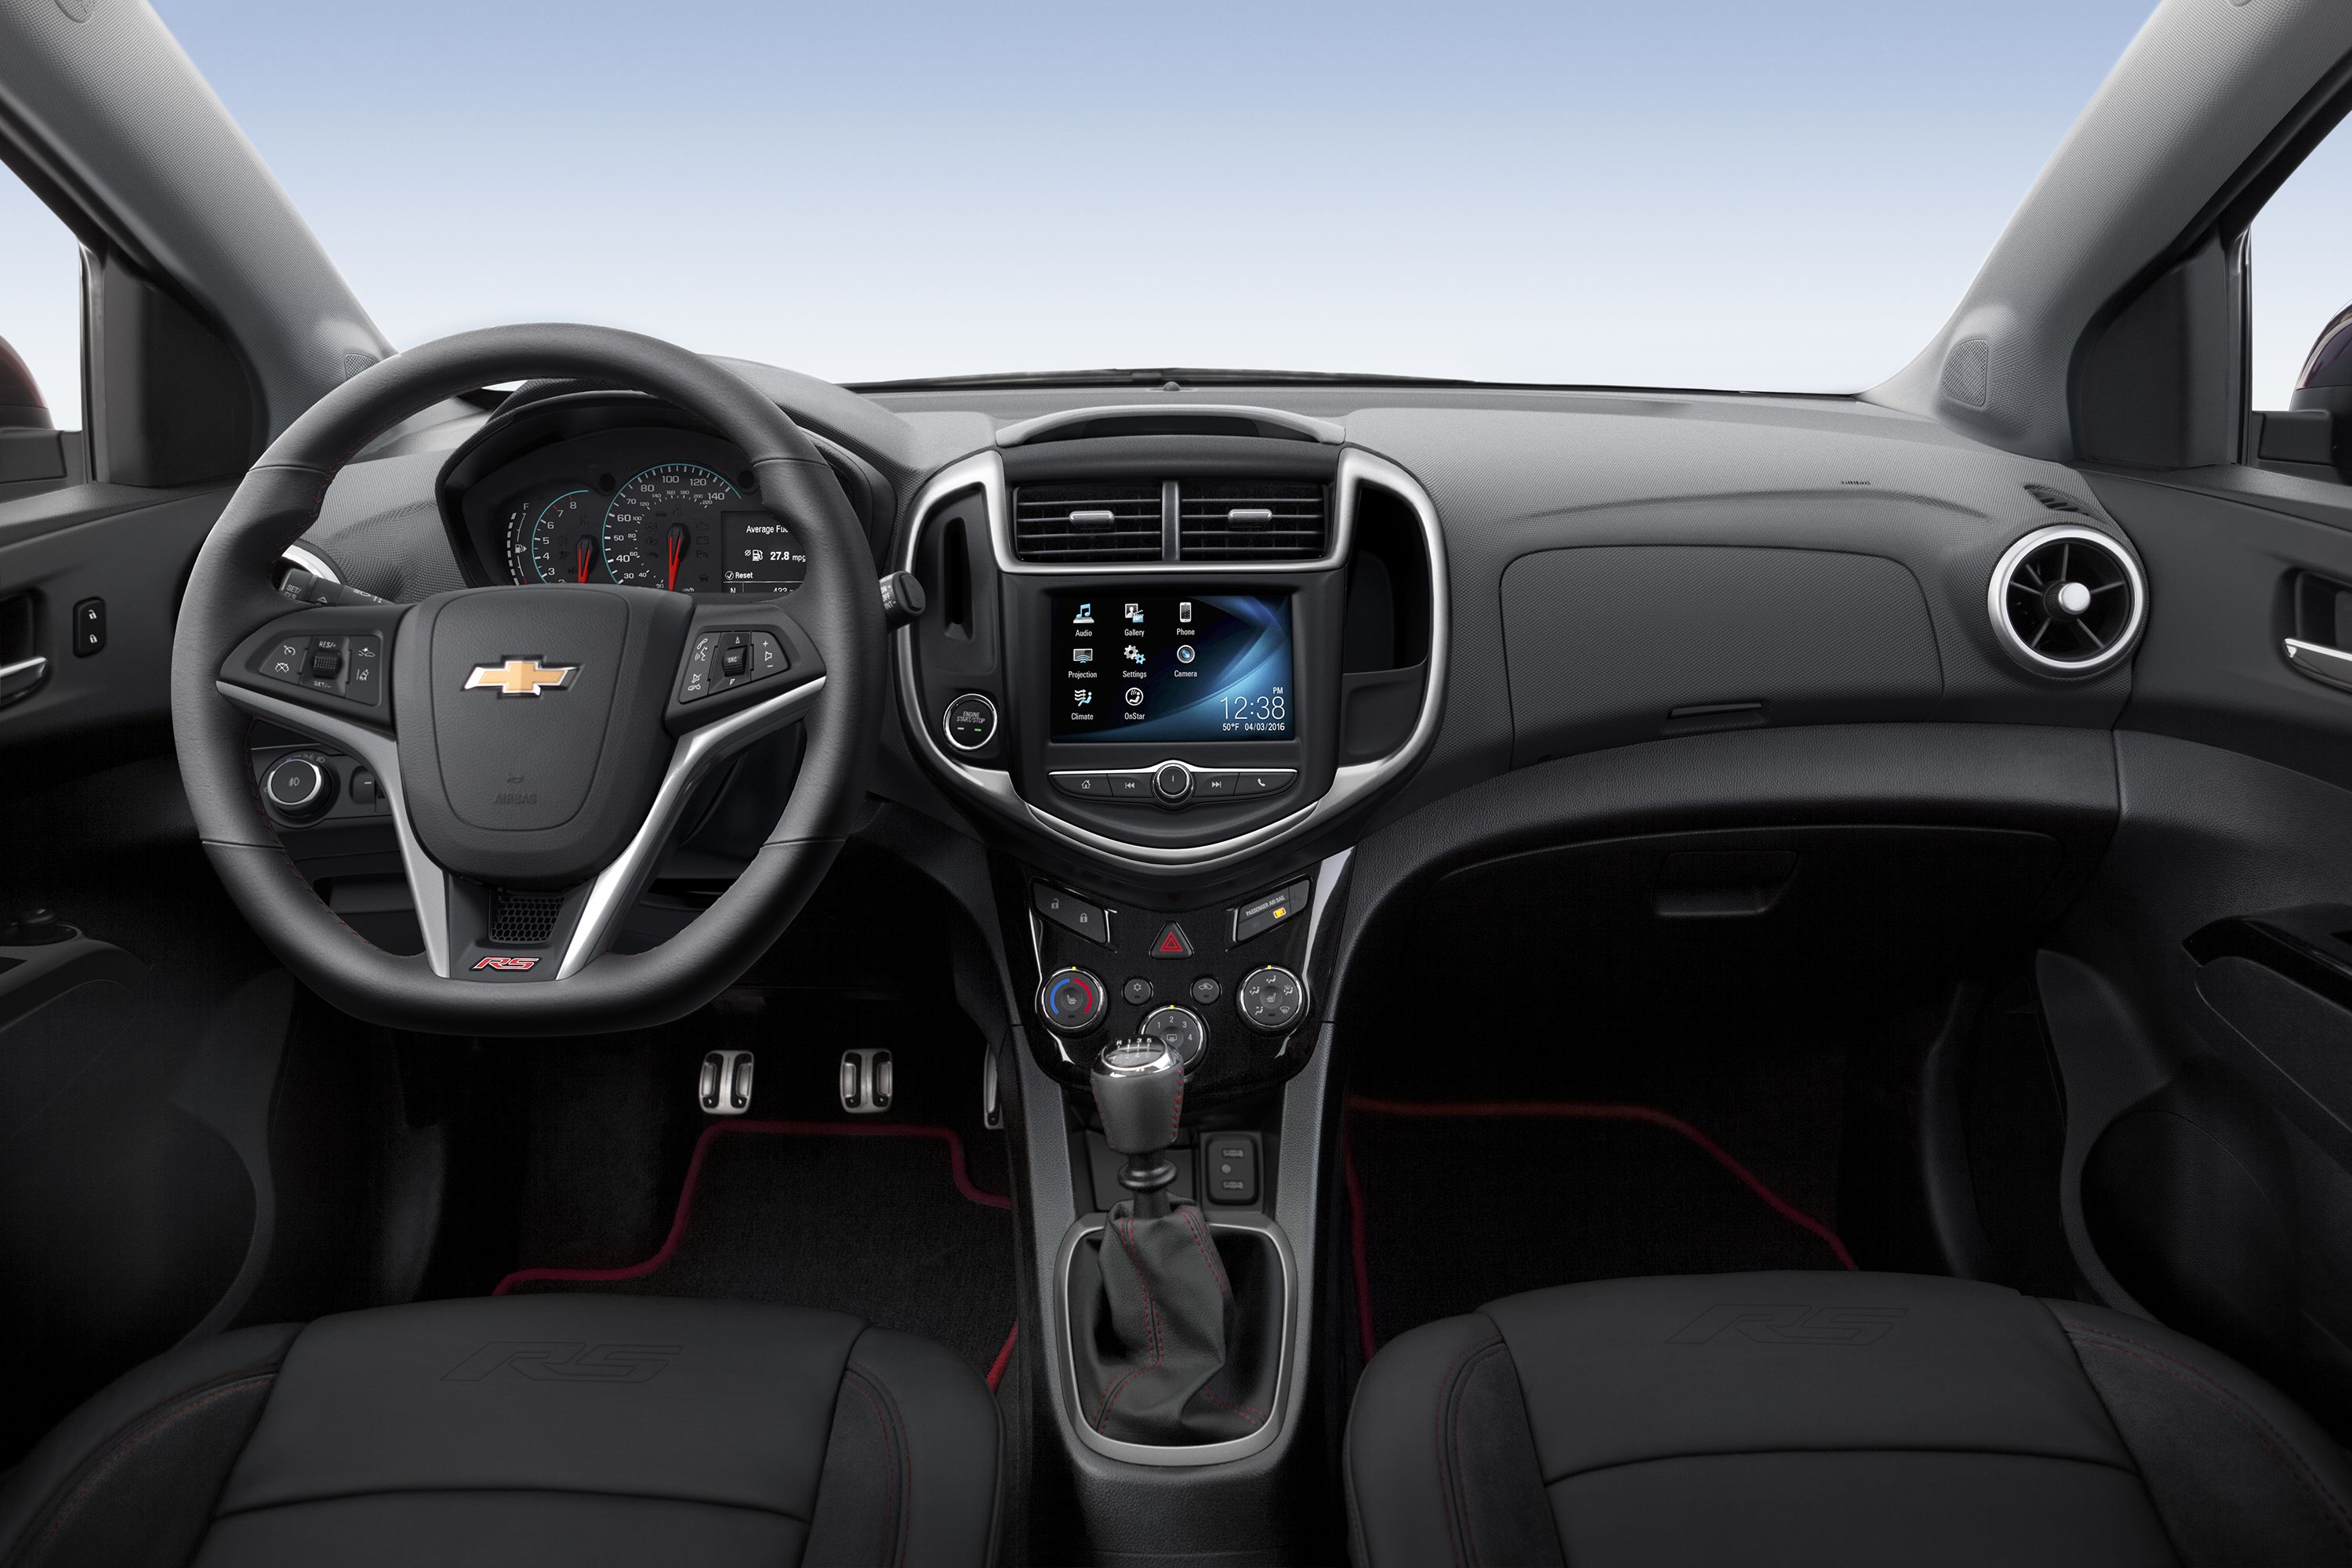 2017 Chevrolet Sonic Review, Pricing, and Specs